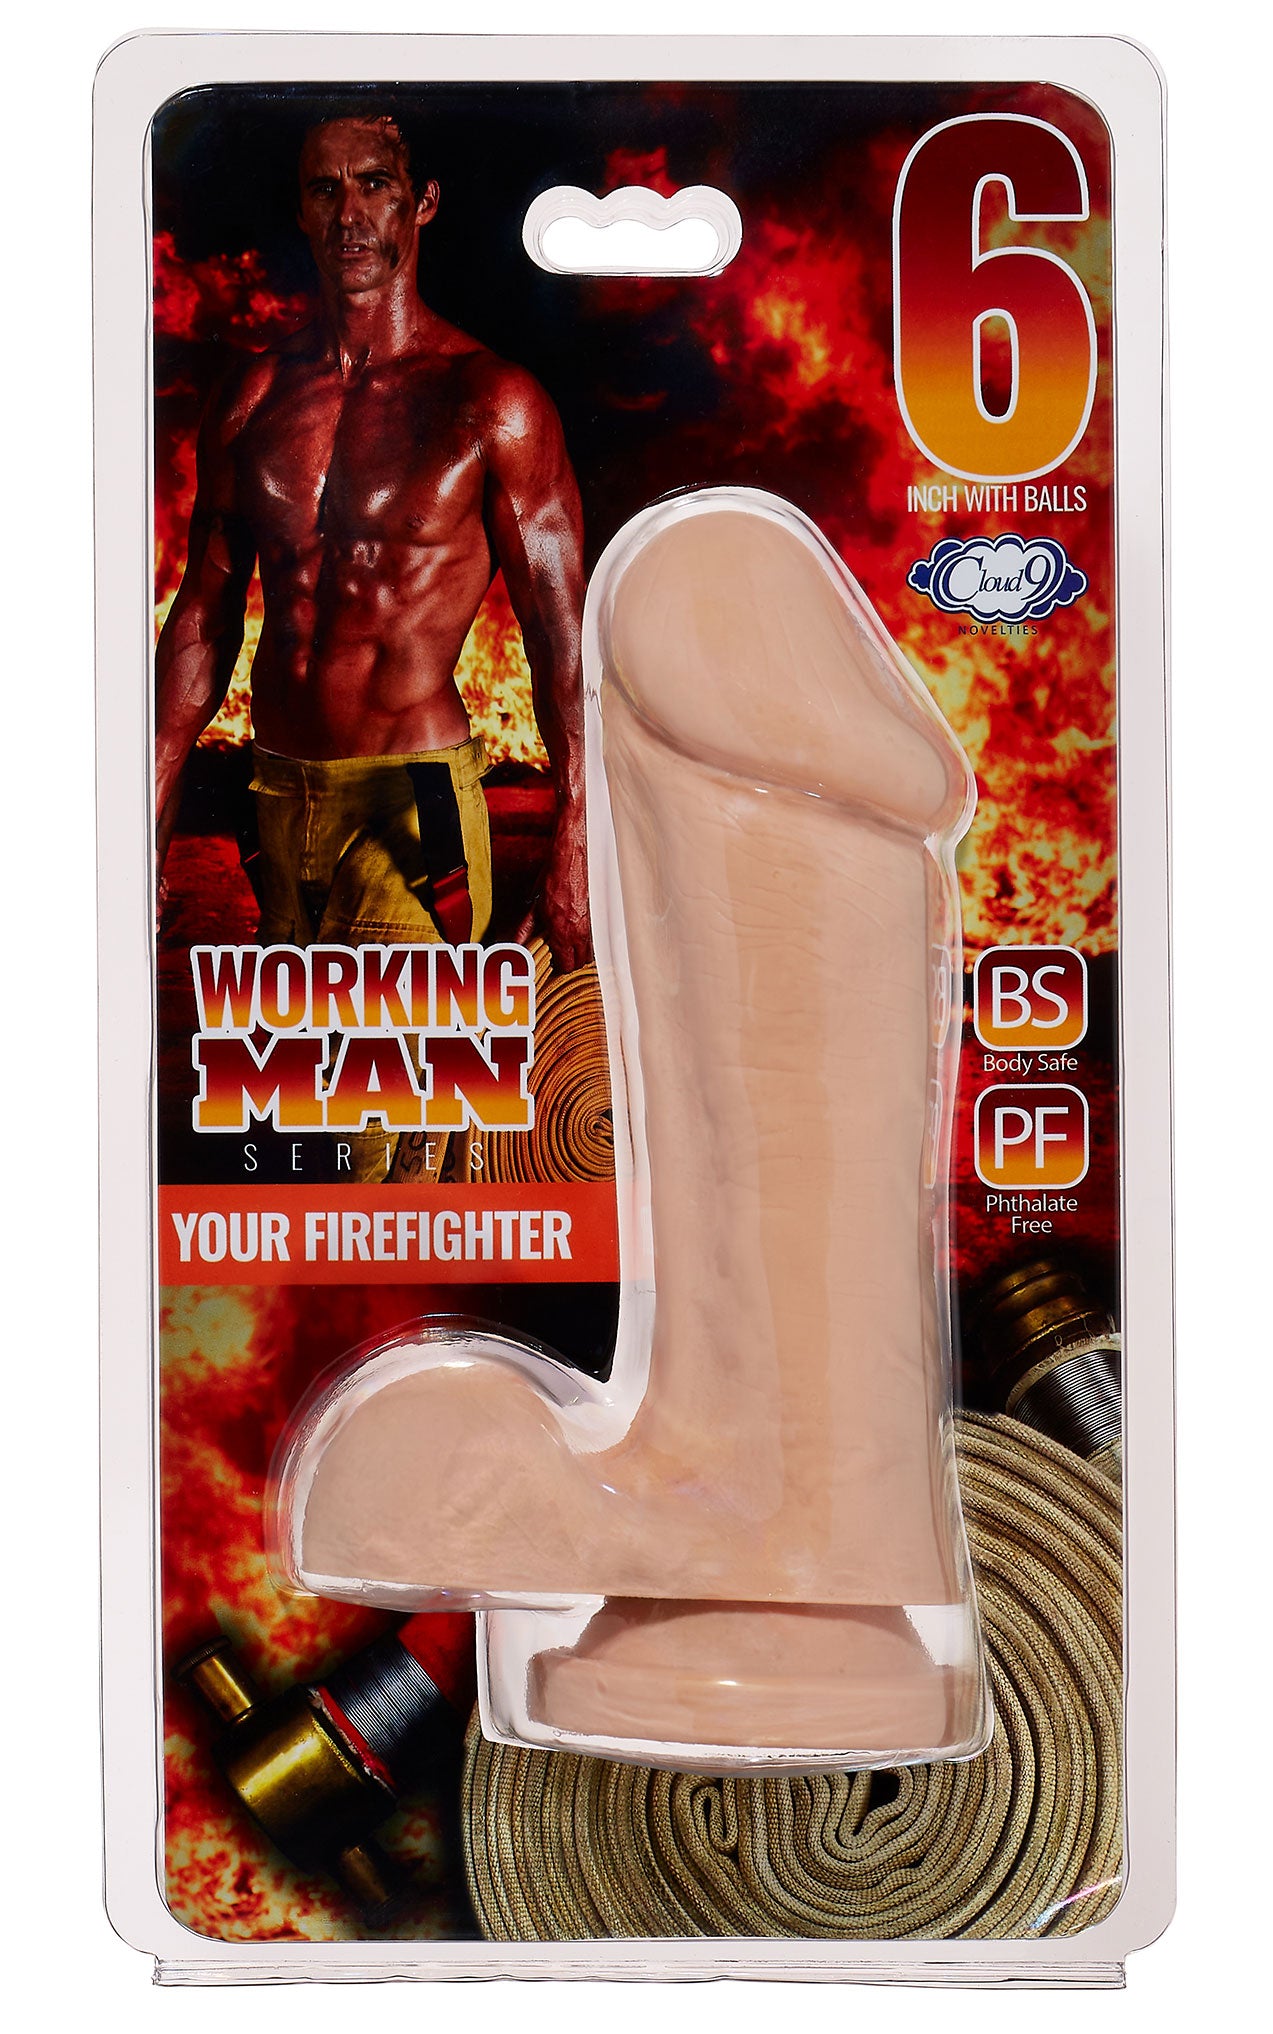 Cloud 9 Working Man 6 Inch With Balls - Your  Firefighter - Light